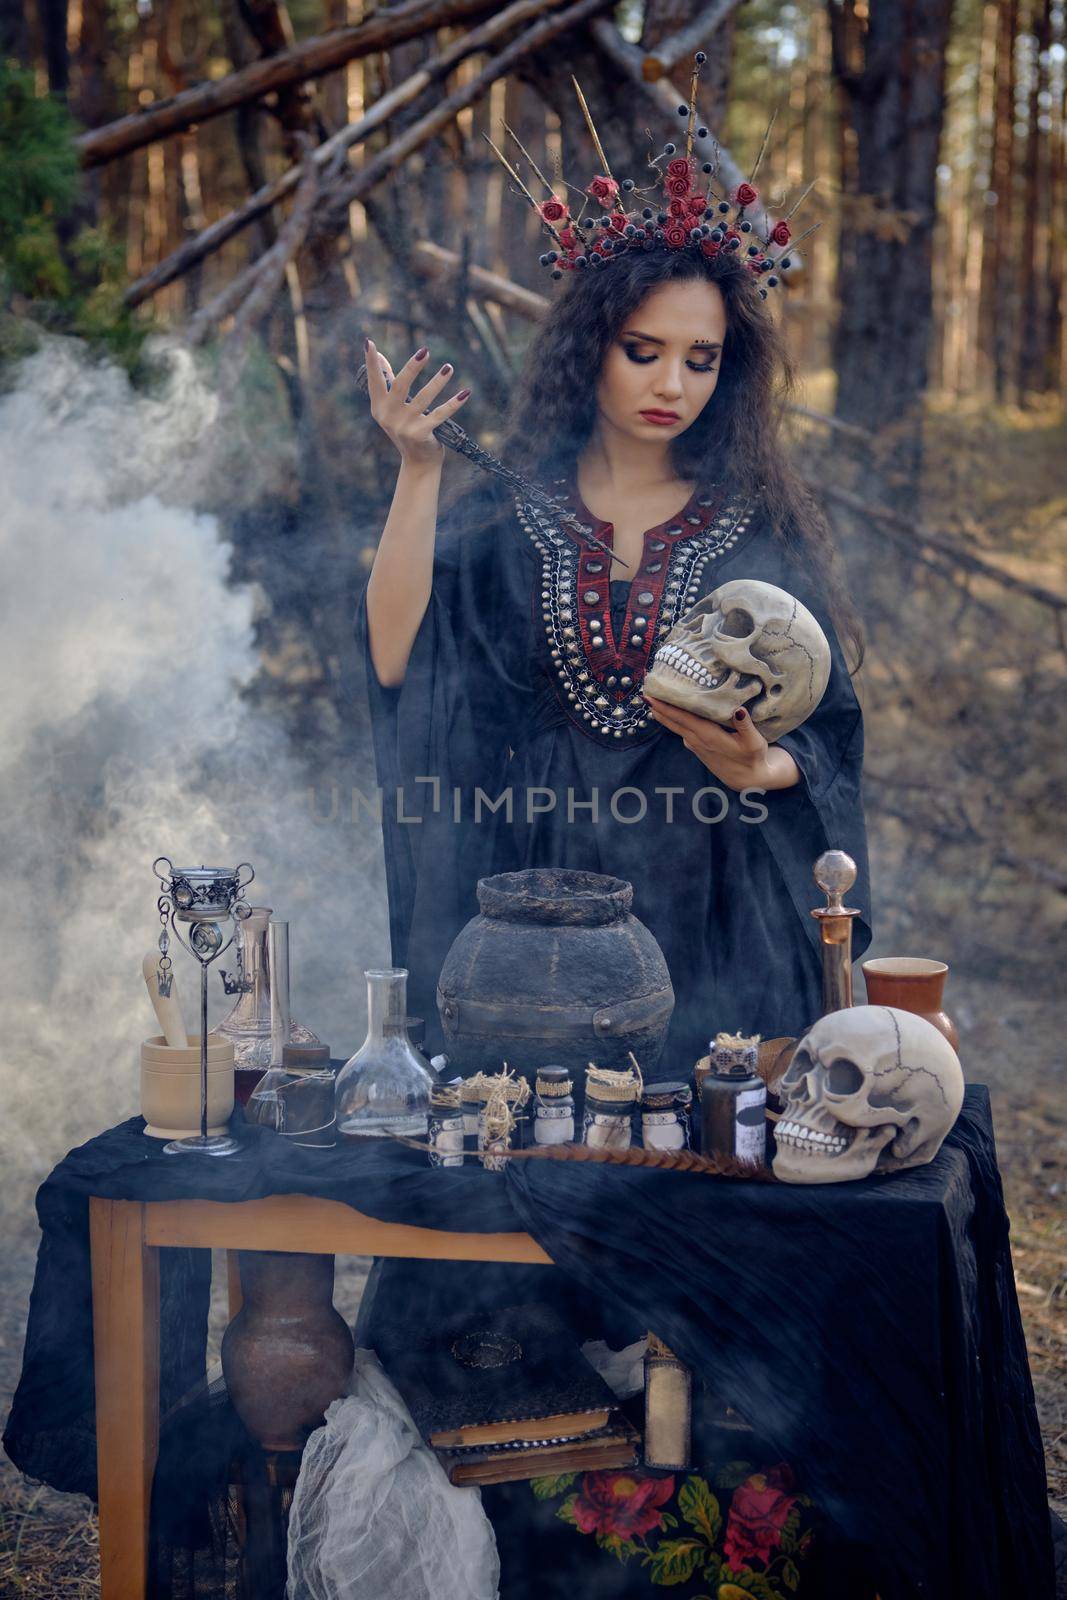 Attractive, wicked, long-haired witch in a black, long embroidered dress. There is large red crown in her brown, curly hair. She is holding a magic wand and a skull while posing in a pine forest standing by the table with accessories for spells and witchcraft, smoke. Potion is brewed in a black pot. Close-up.